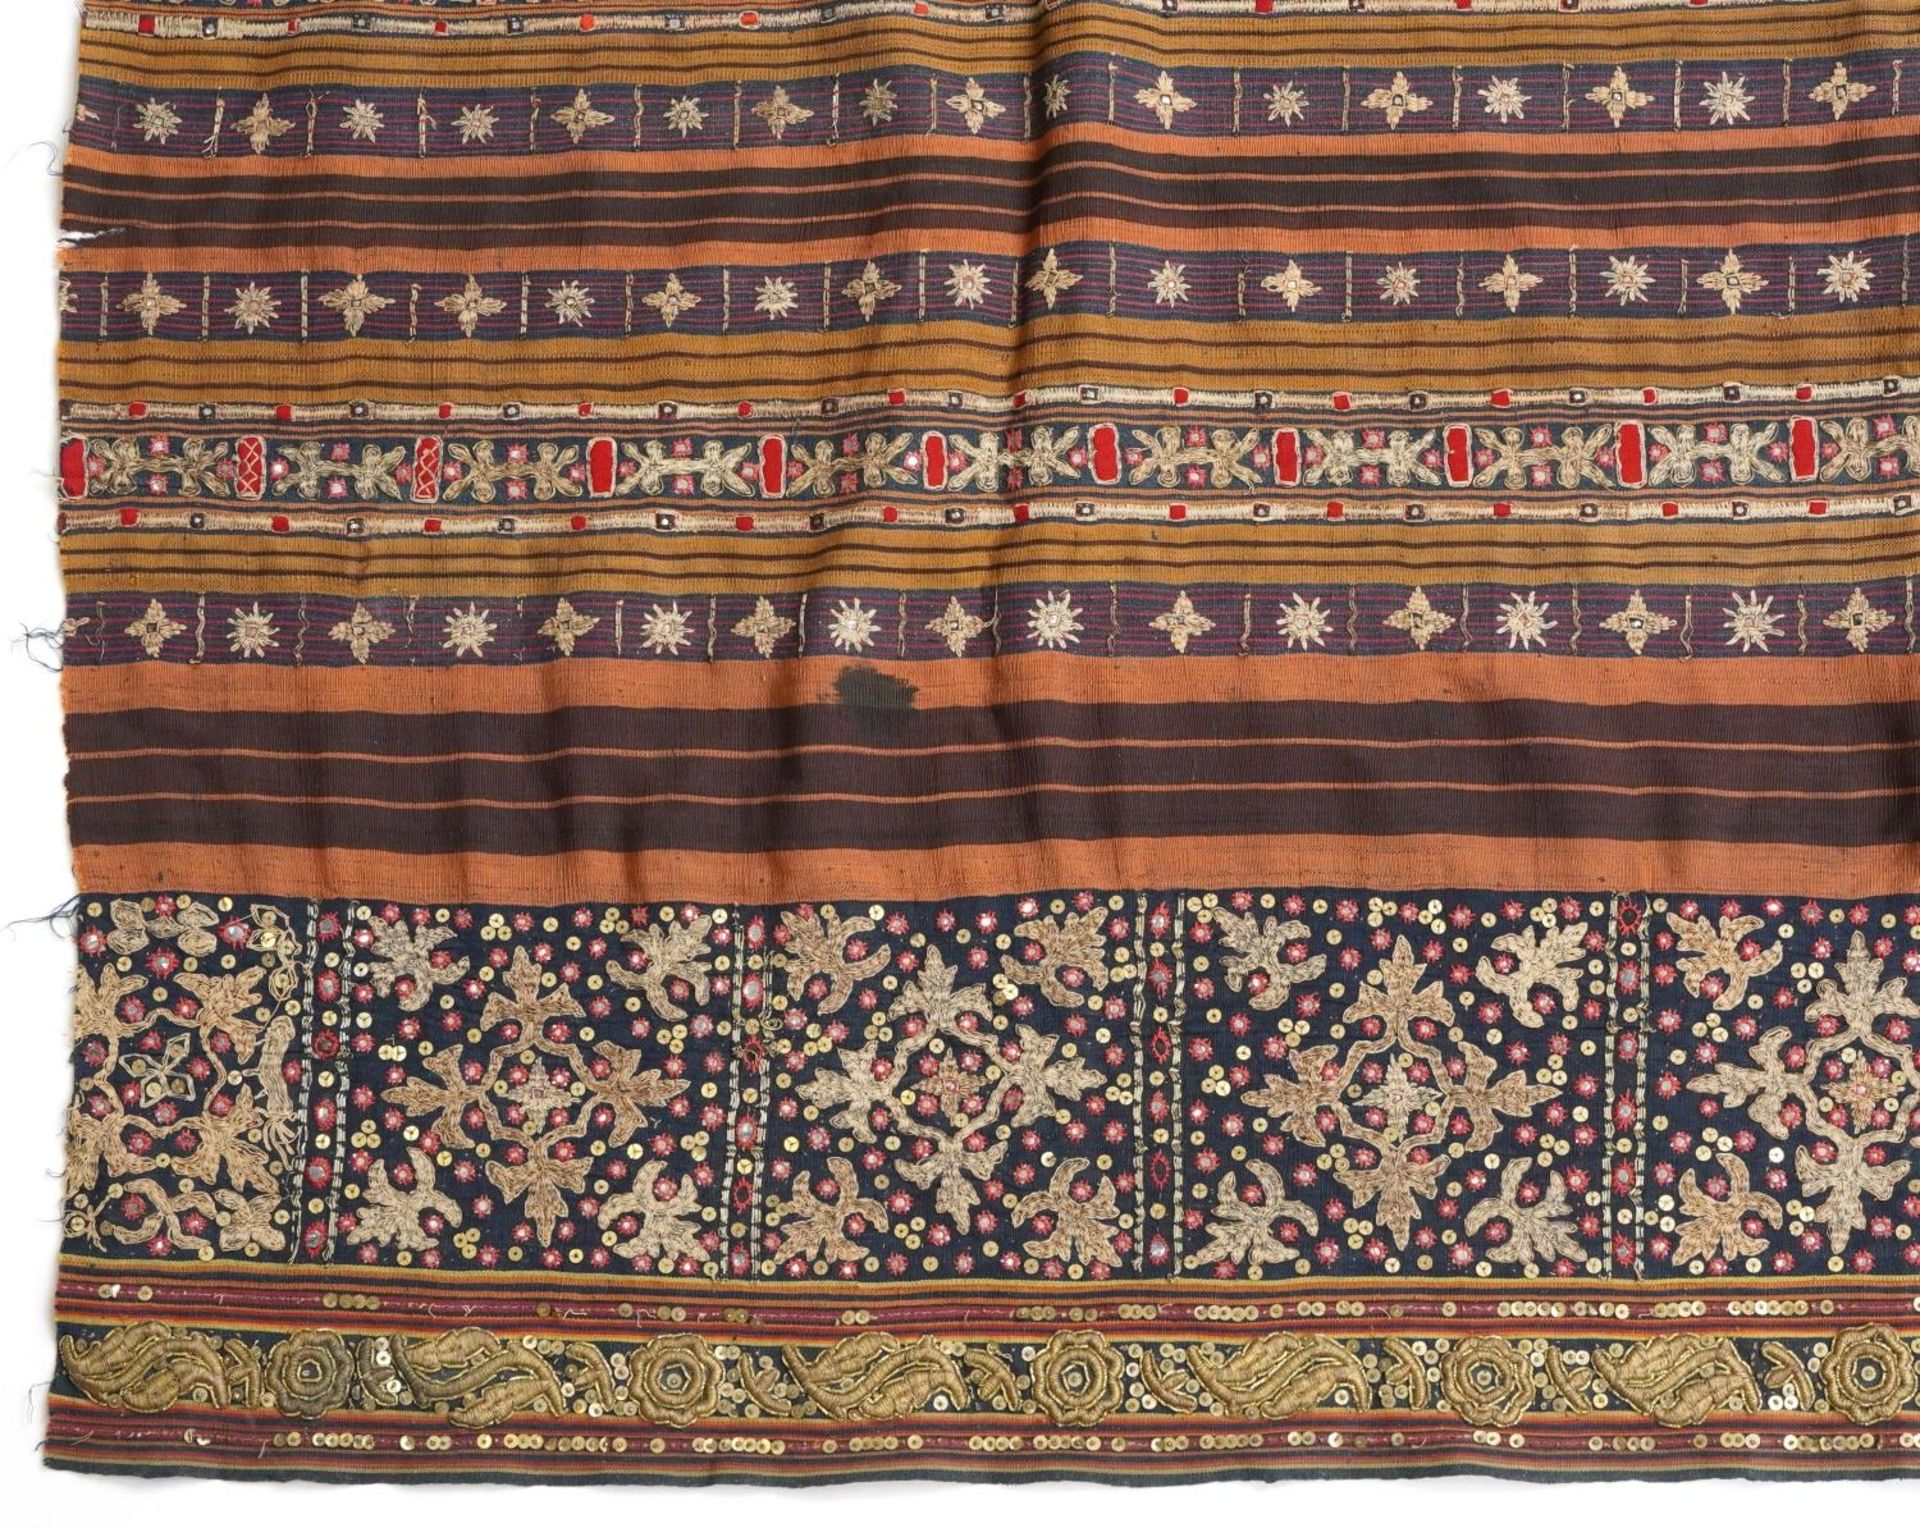 Islamic gold braided textile embroidered with flowers and a robe, the robe 115cm high - Image 6 of 7